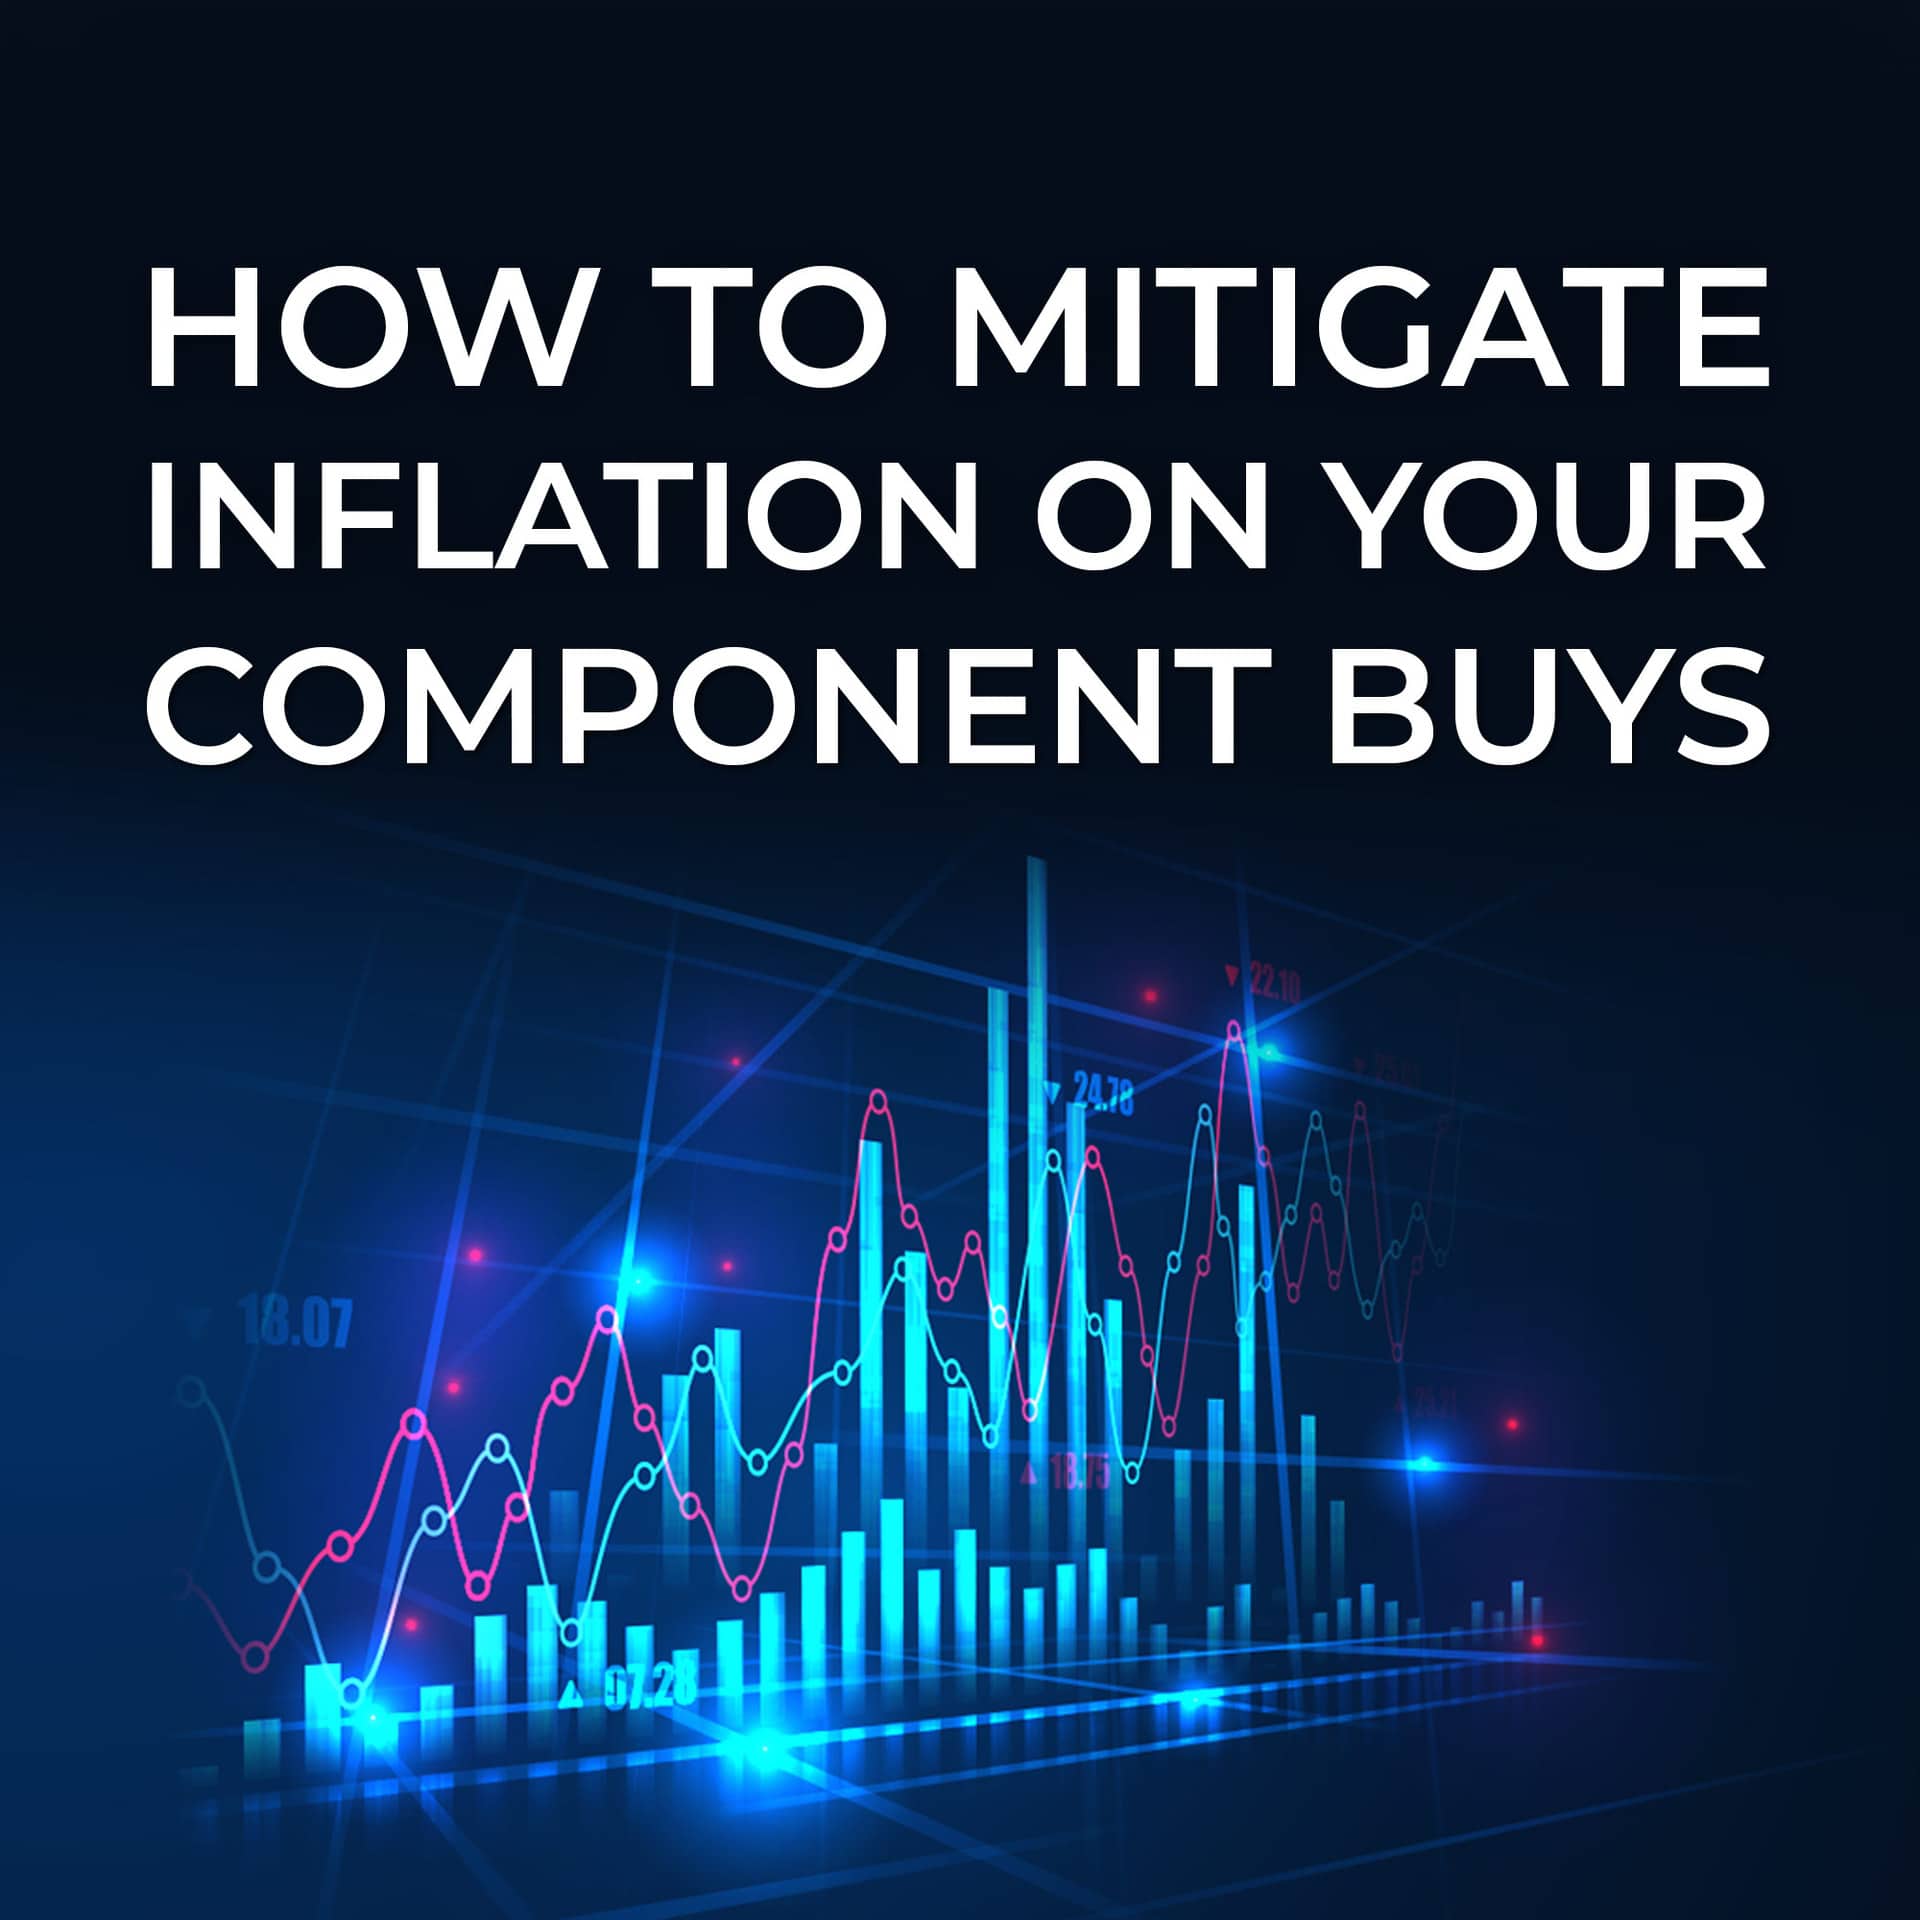 How to Mitigate Inflation on Your Component Buys